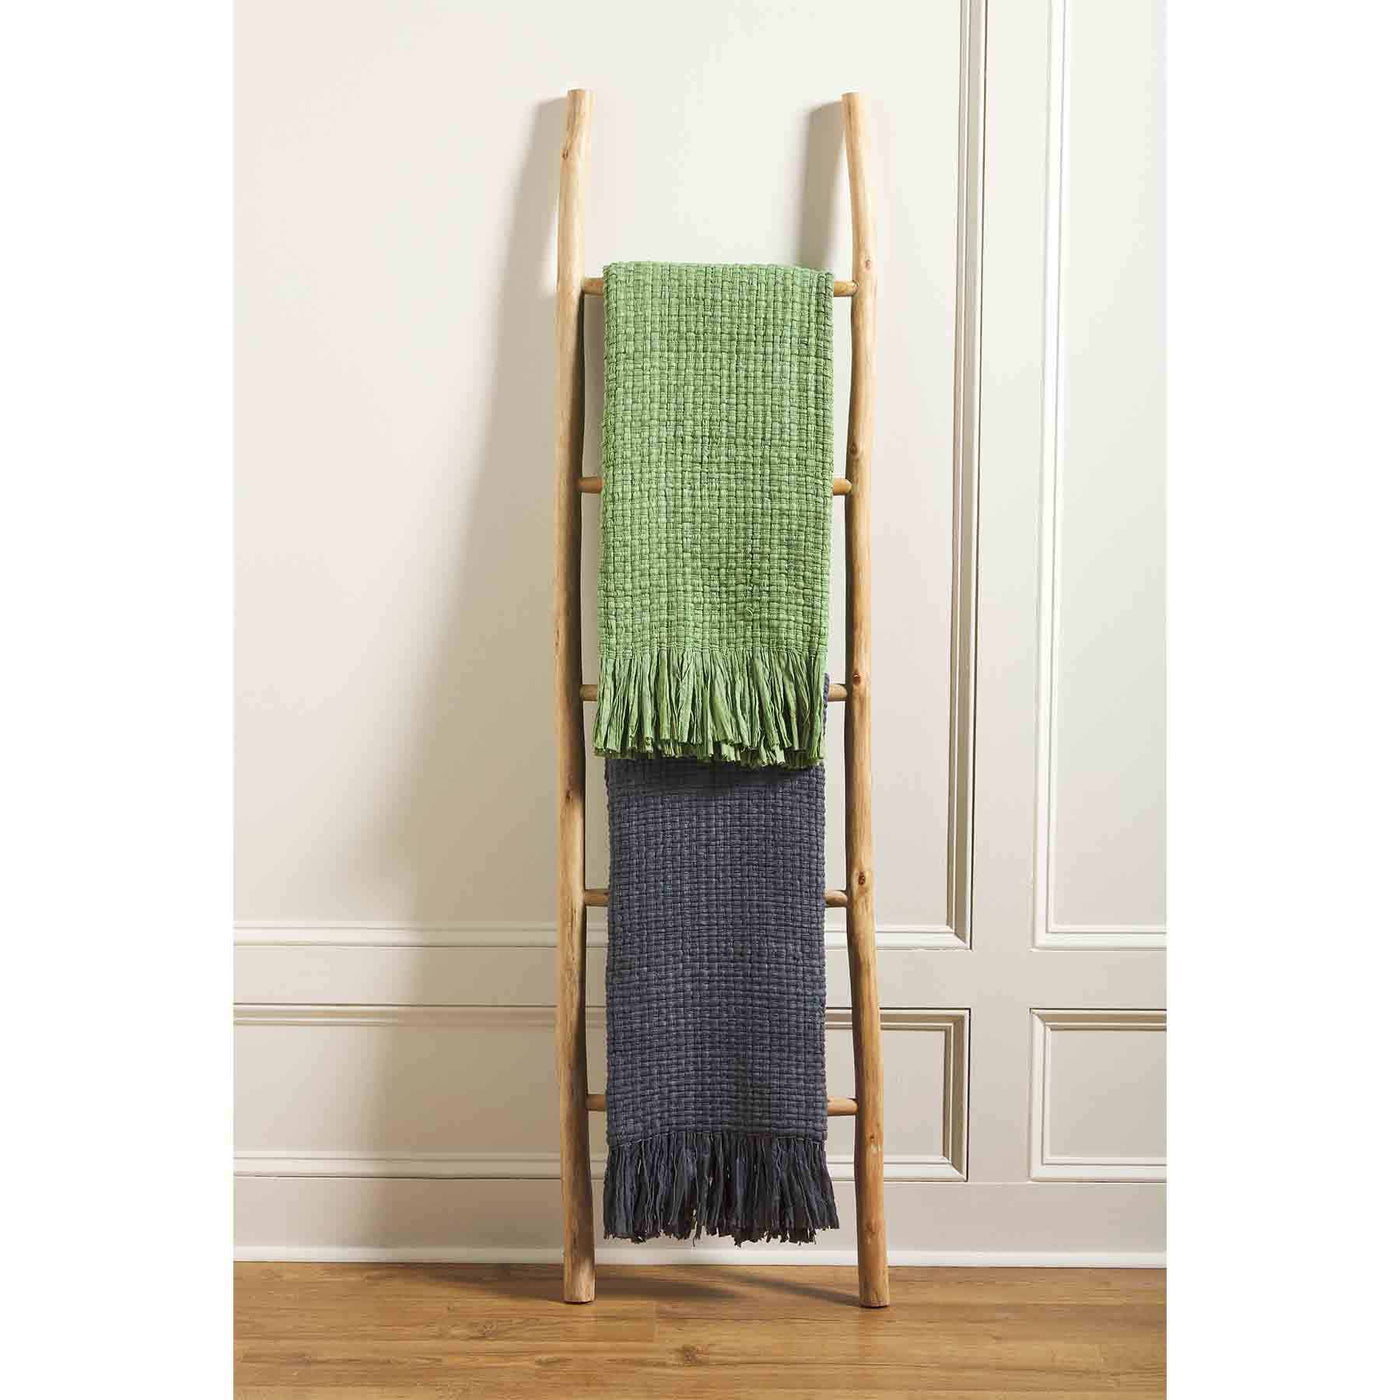 GREEN RECYCLED COLORED THROW